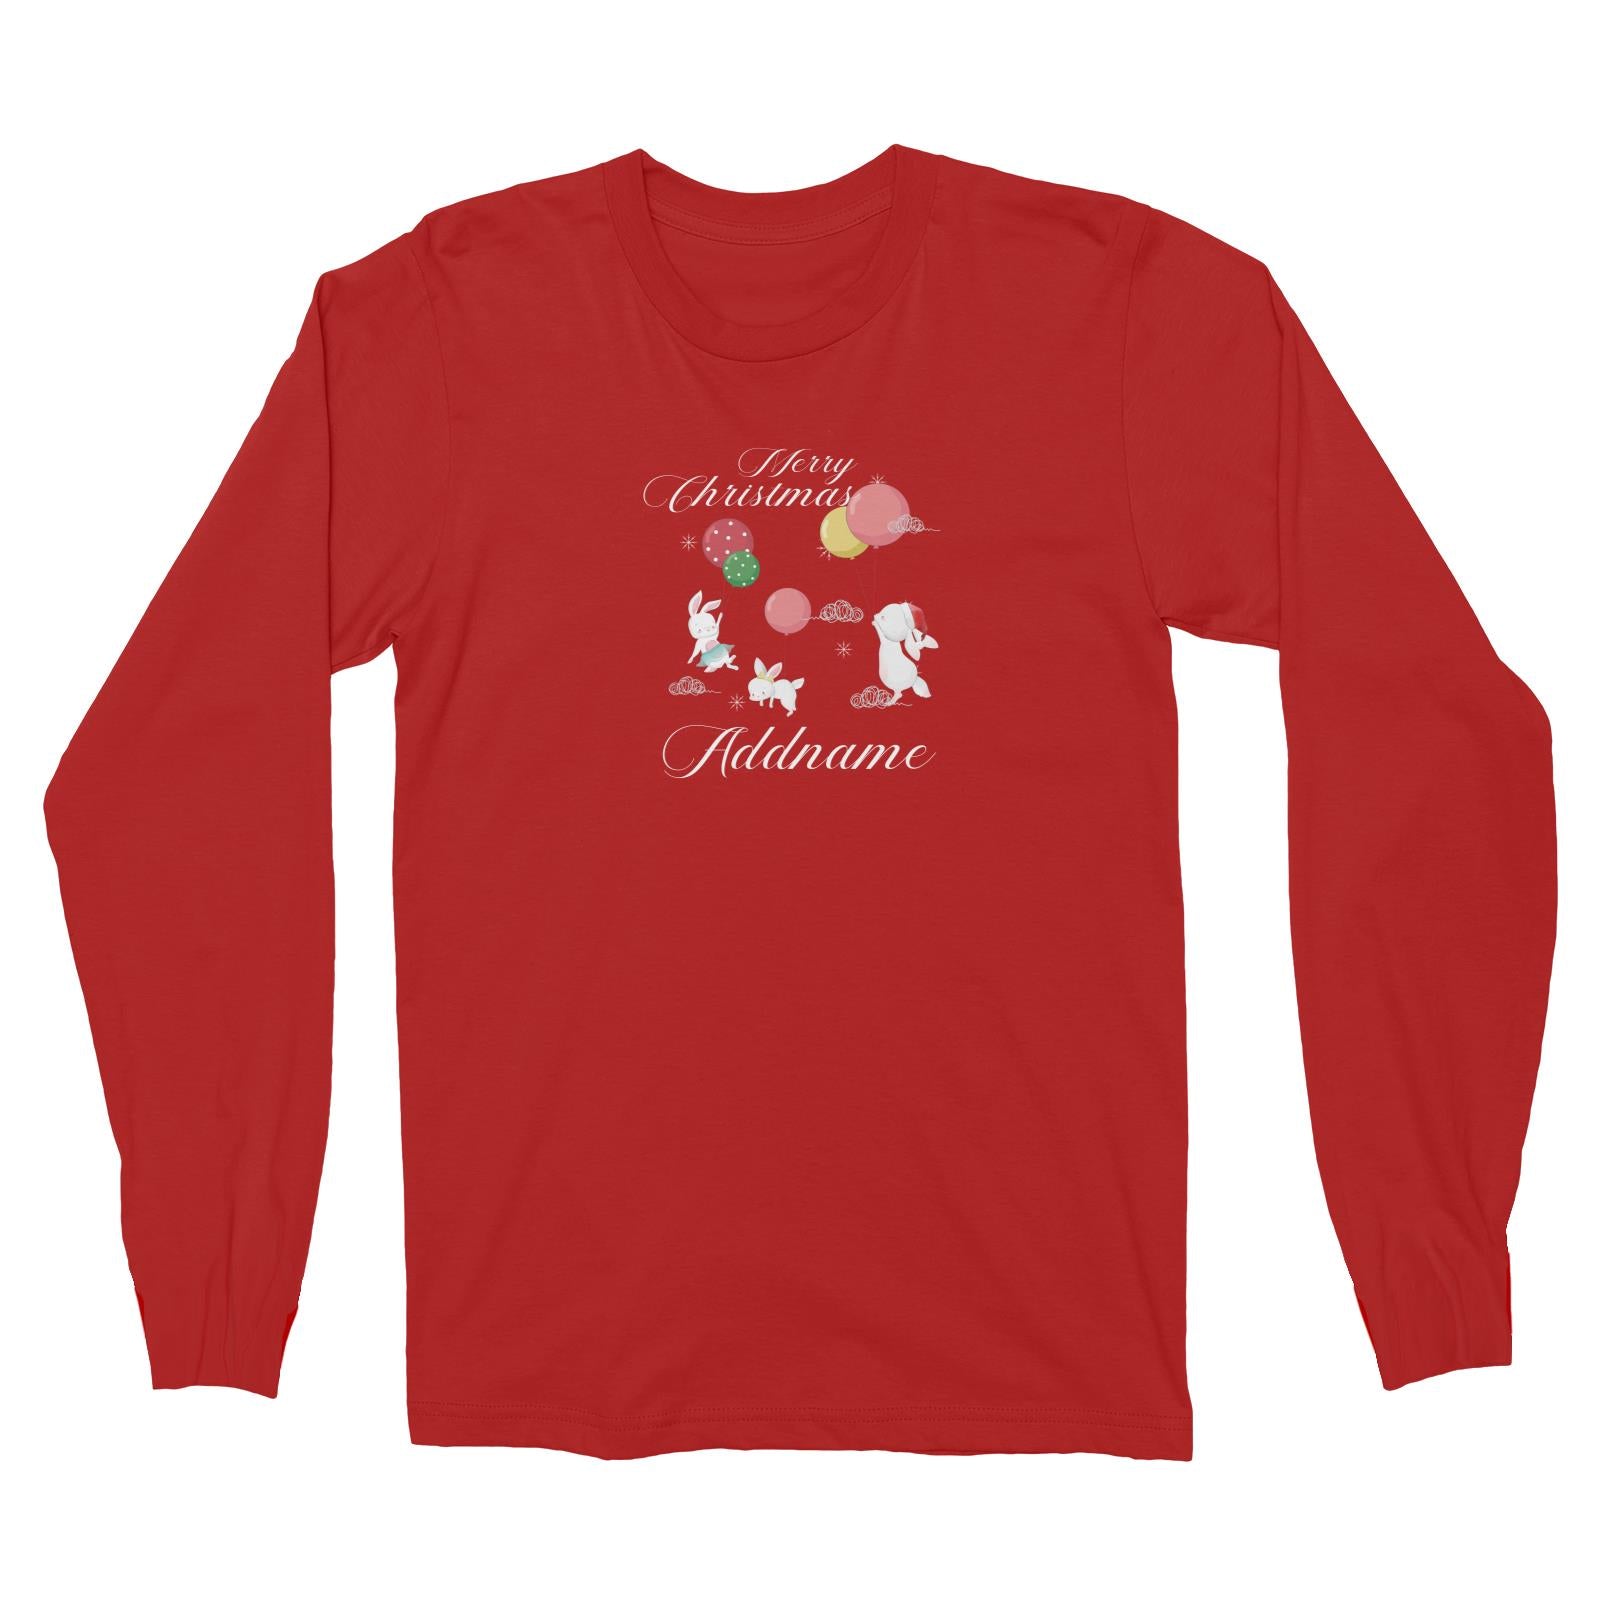 Christmas Cute Rabbits With Balloons Merry Christmas Addname Long Sleeve Unisex T-Shirt